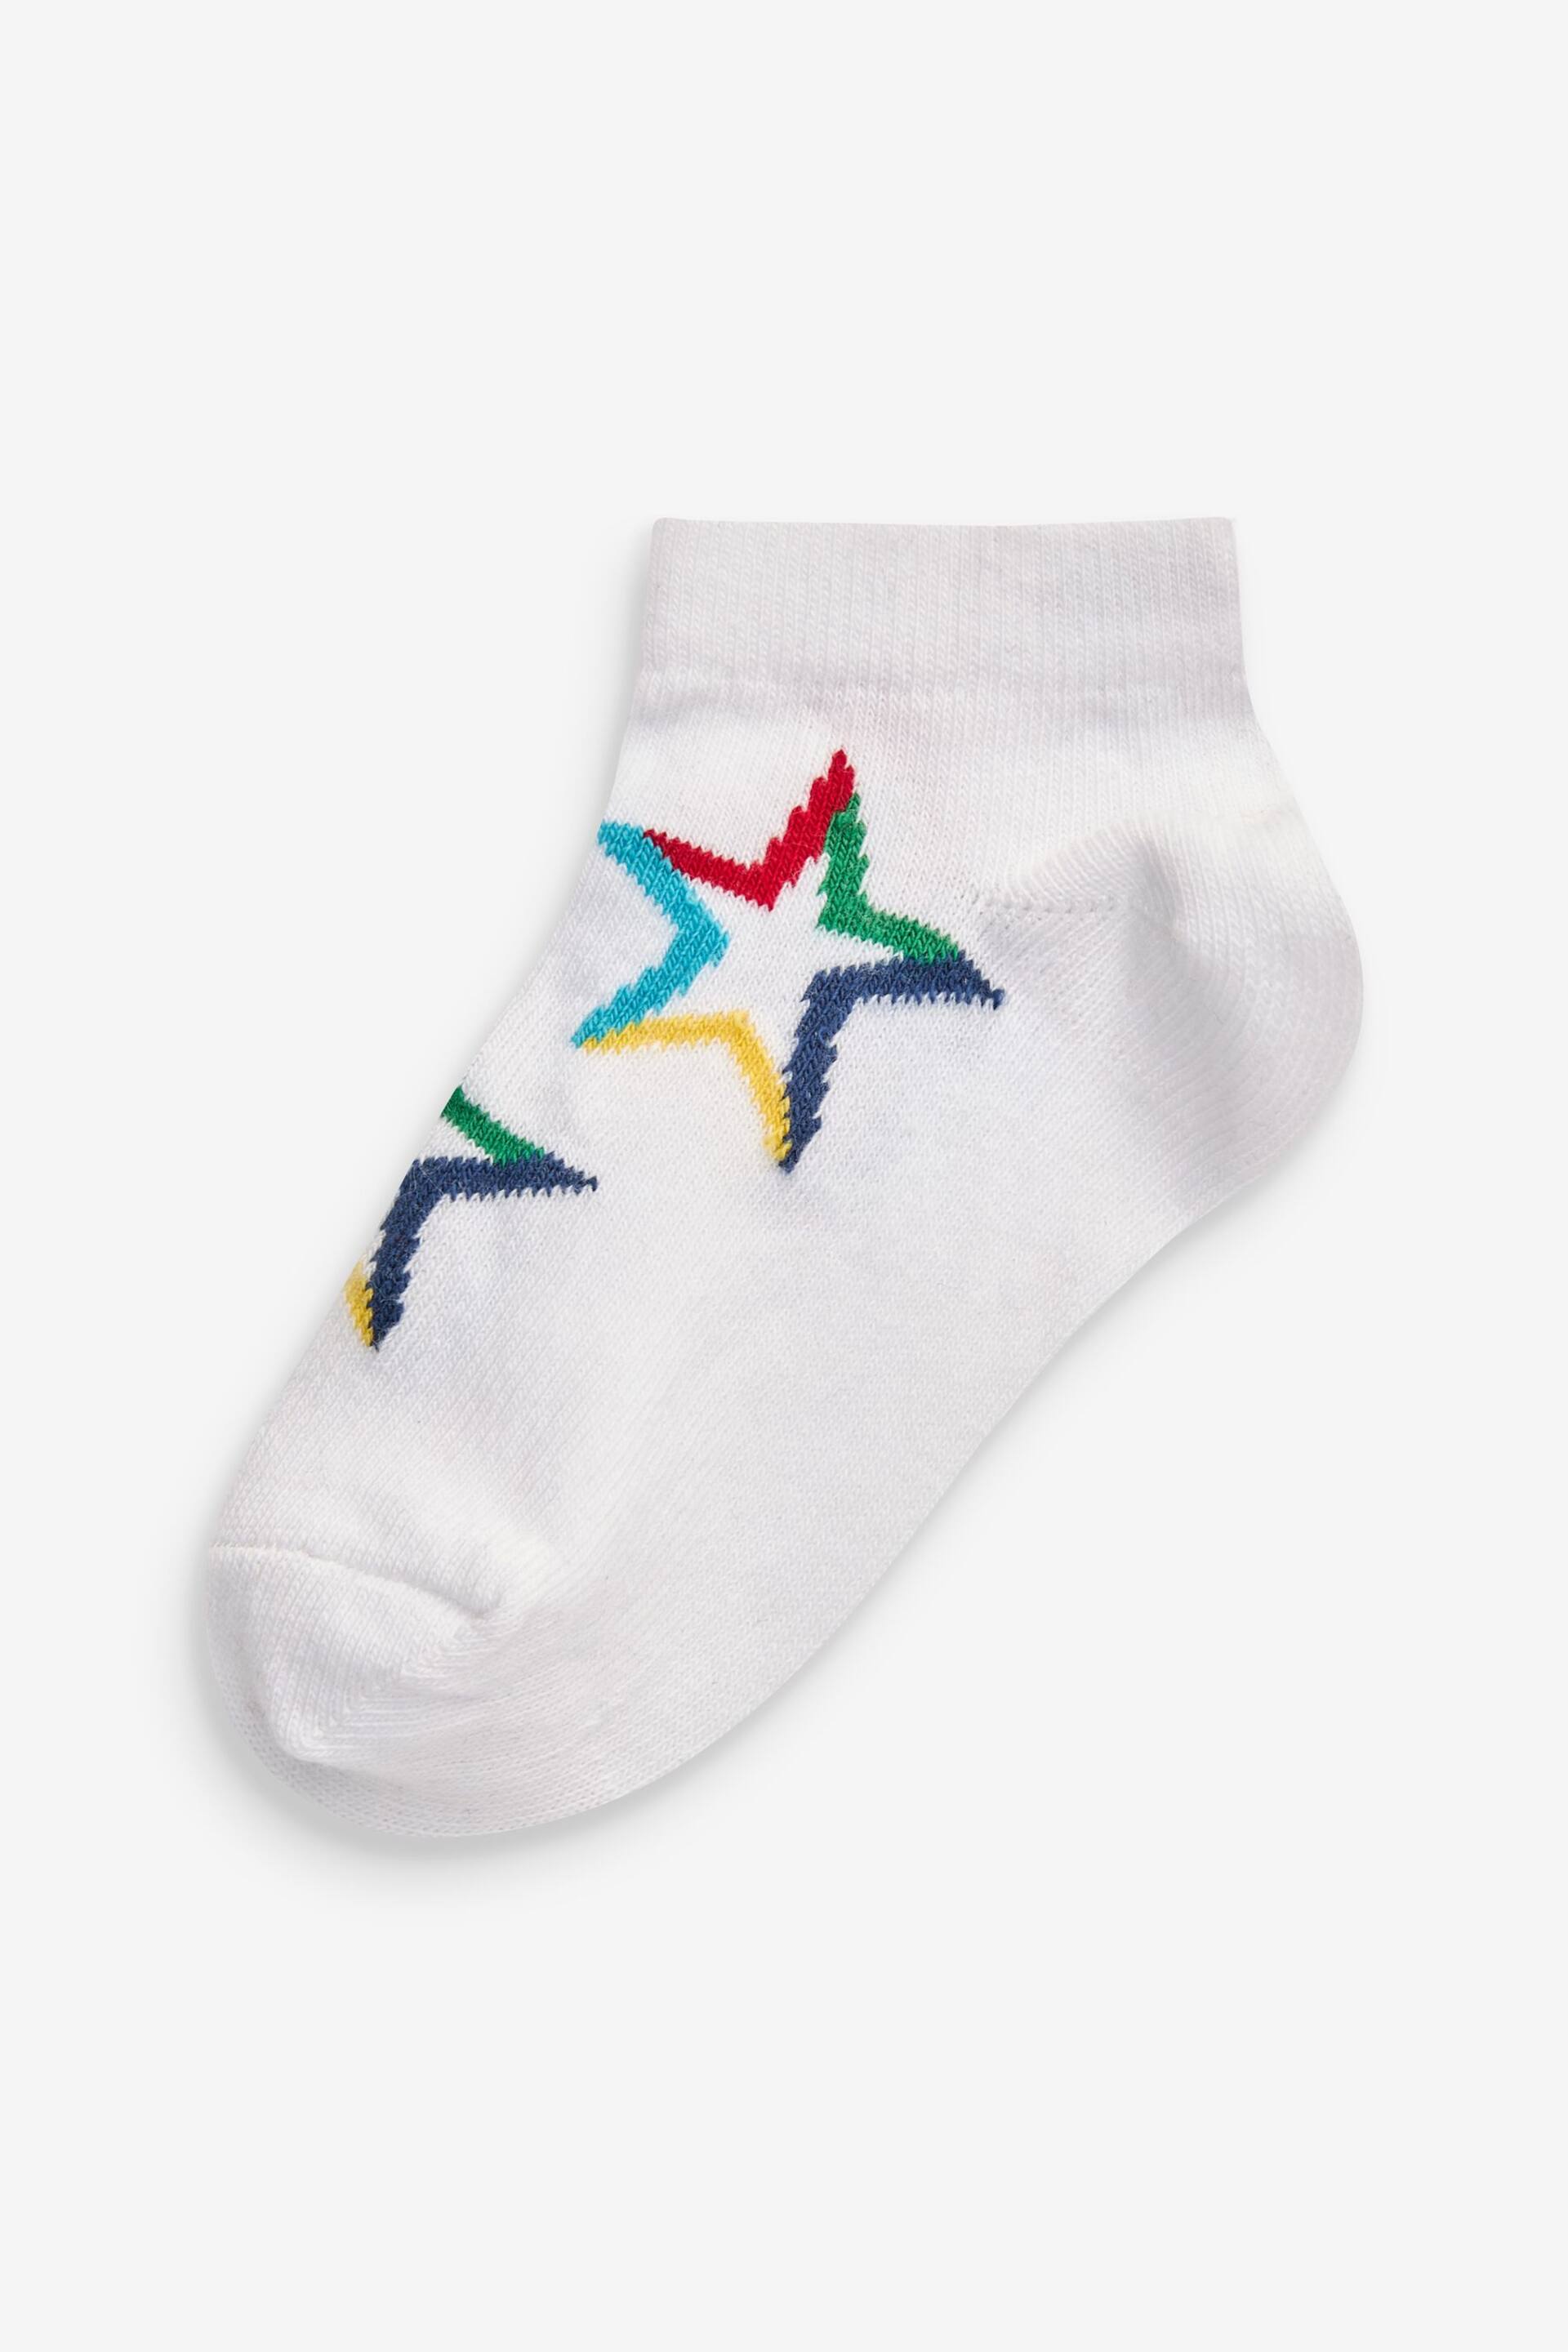 White/Blue/Red Star Cotton Rich Trainer Socks 7 Pack - Image 3 of 8